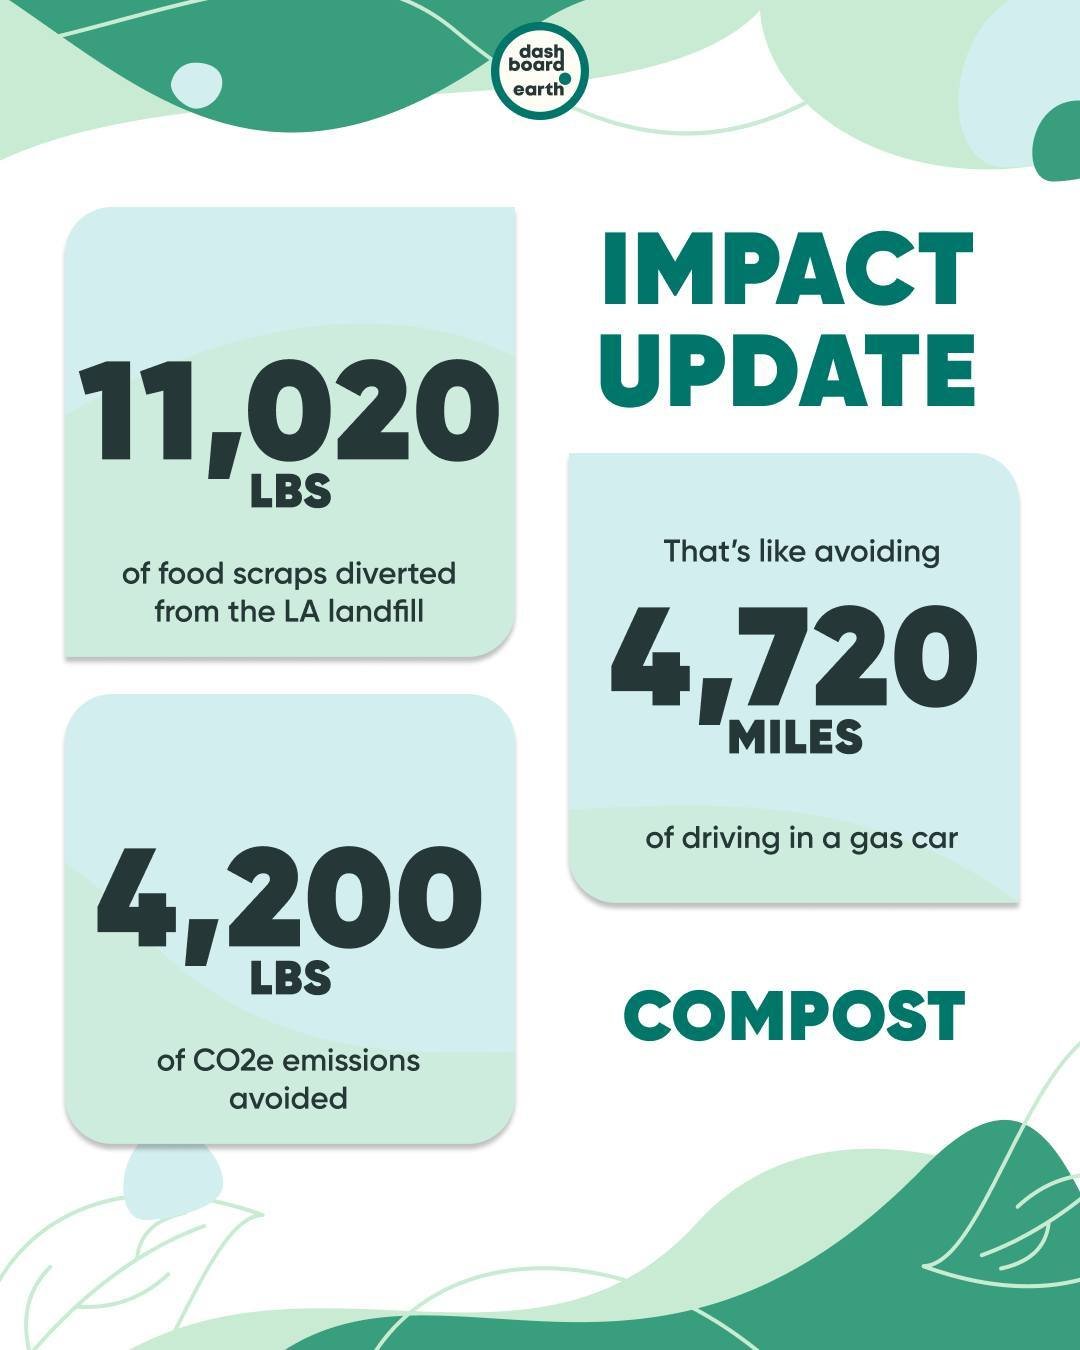 As Earth Month enters its final week, we wanted to take a moment to celebrate our community on the ground in LA, changing up habits and taking daily actions to make our city resilient. Here's what we've accomplished in the past few months just by div